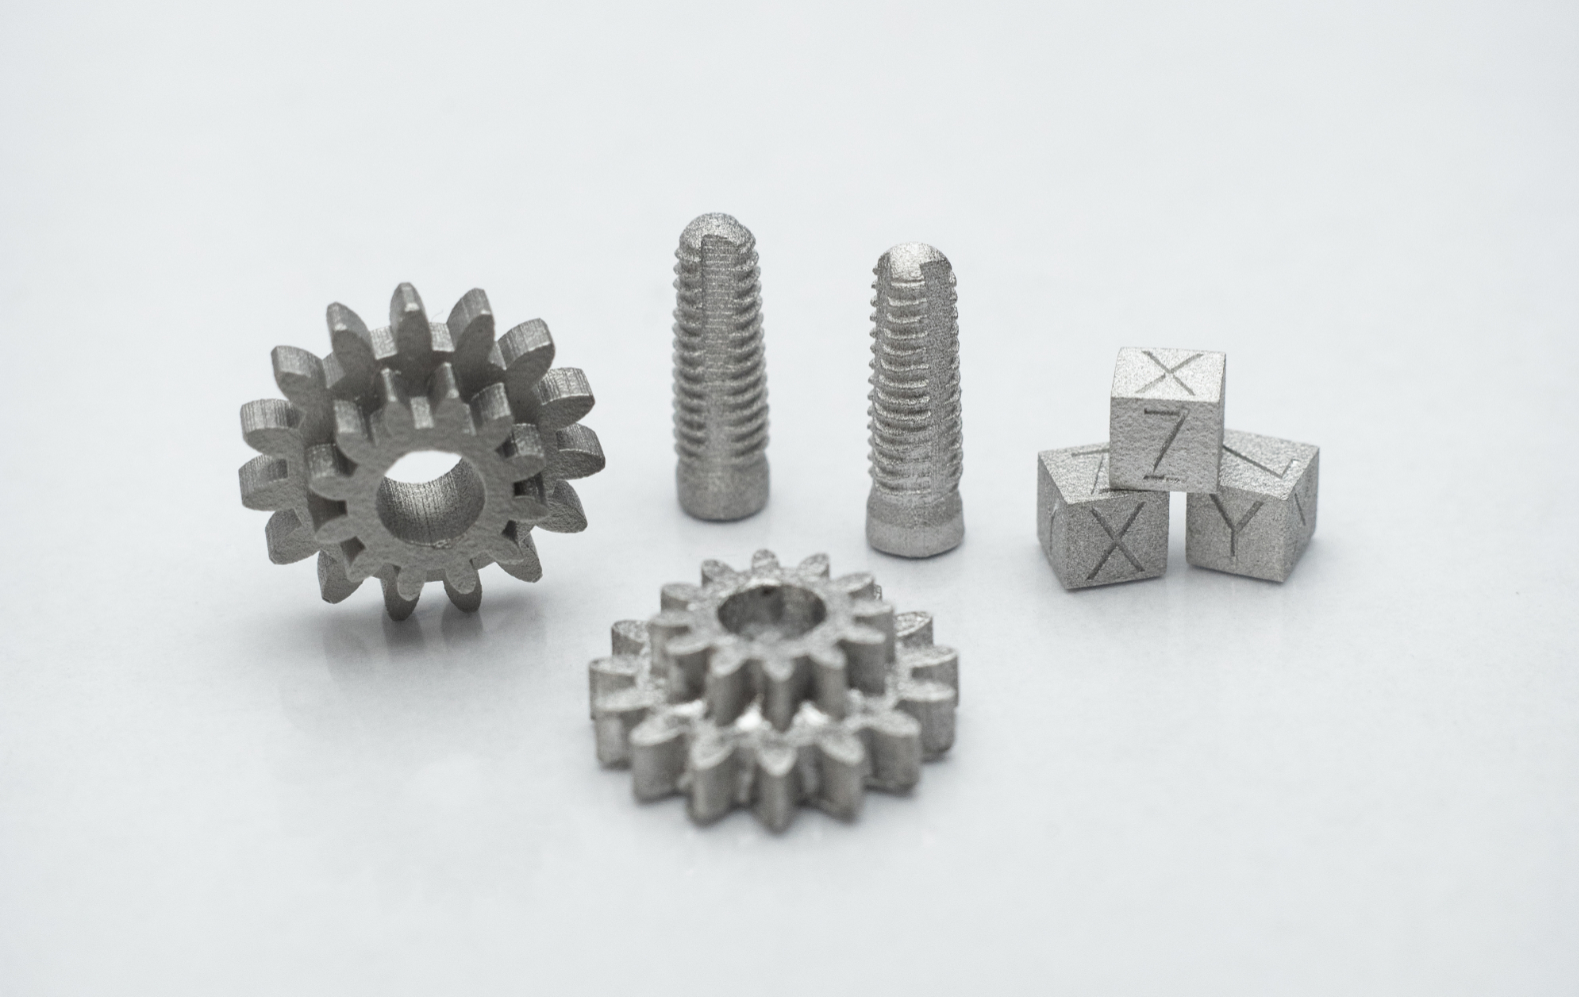 Metal parts printed on the Hammer Lab35 metal 3D printer. Image by Incus GmbH.